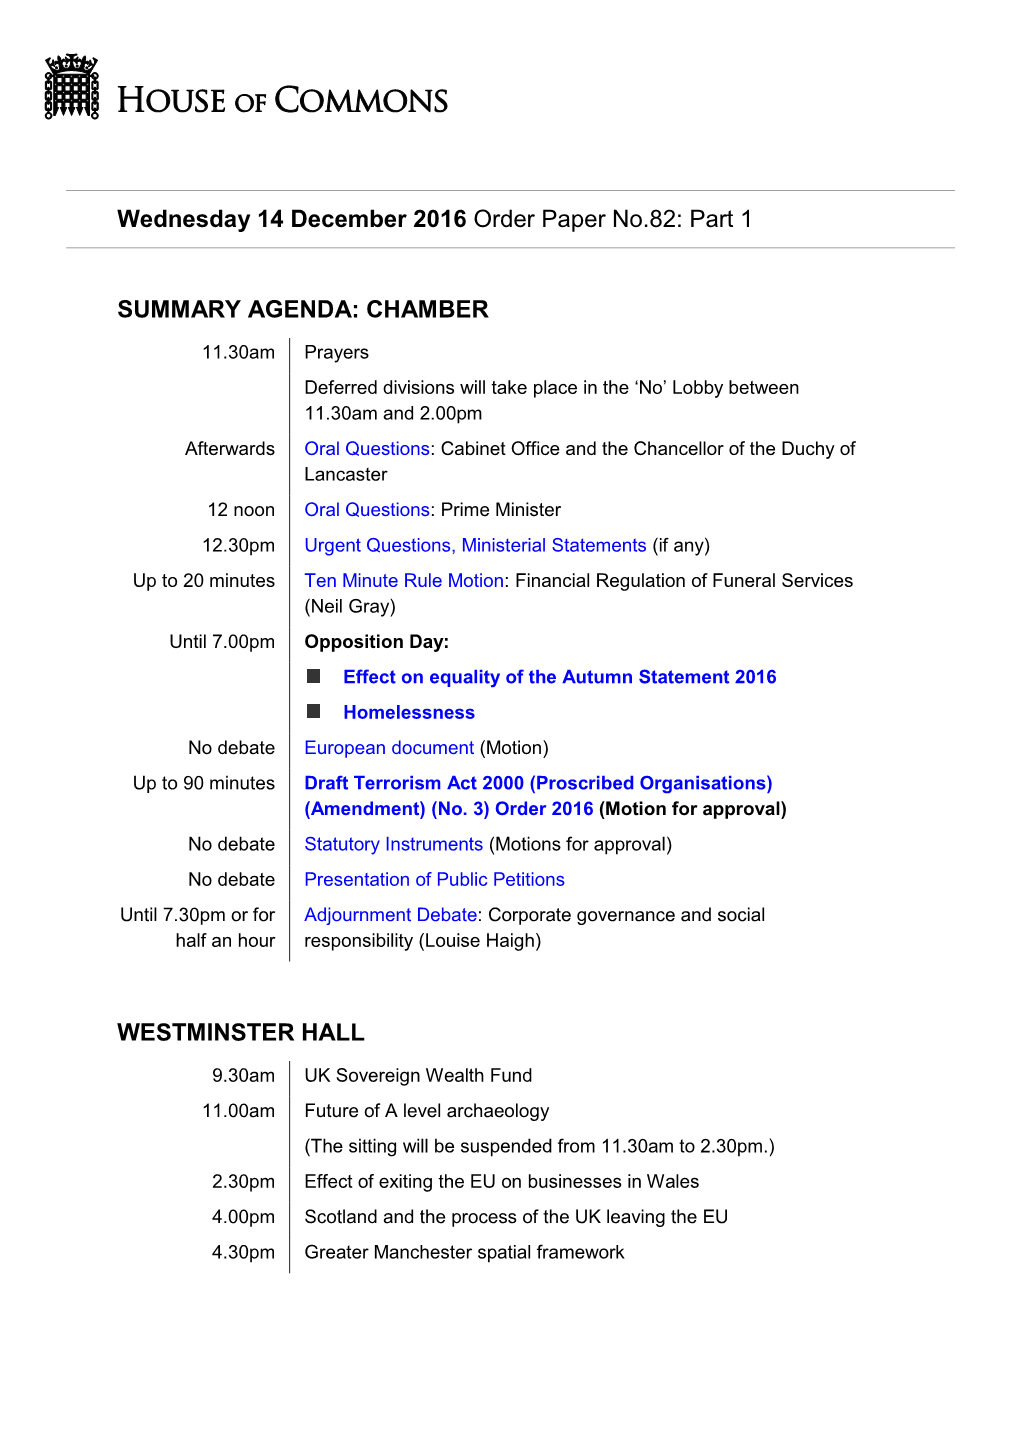 Wednesday 14 December 2016 Order Paper No.82: Part 1 SUMMARY AGENDA: CHAMBER WESTMINSTER HALL